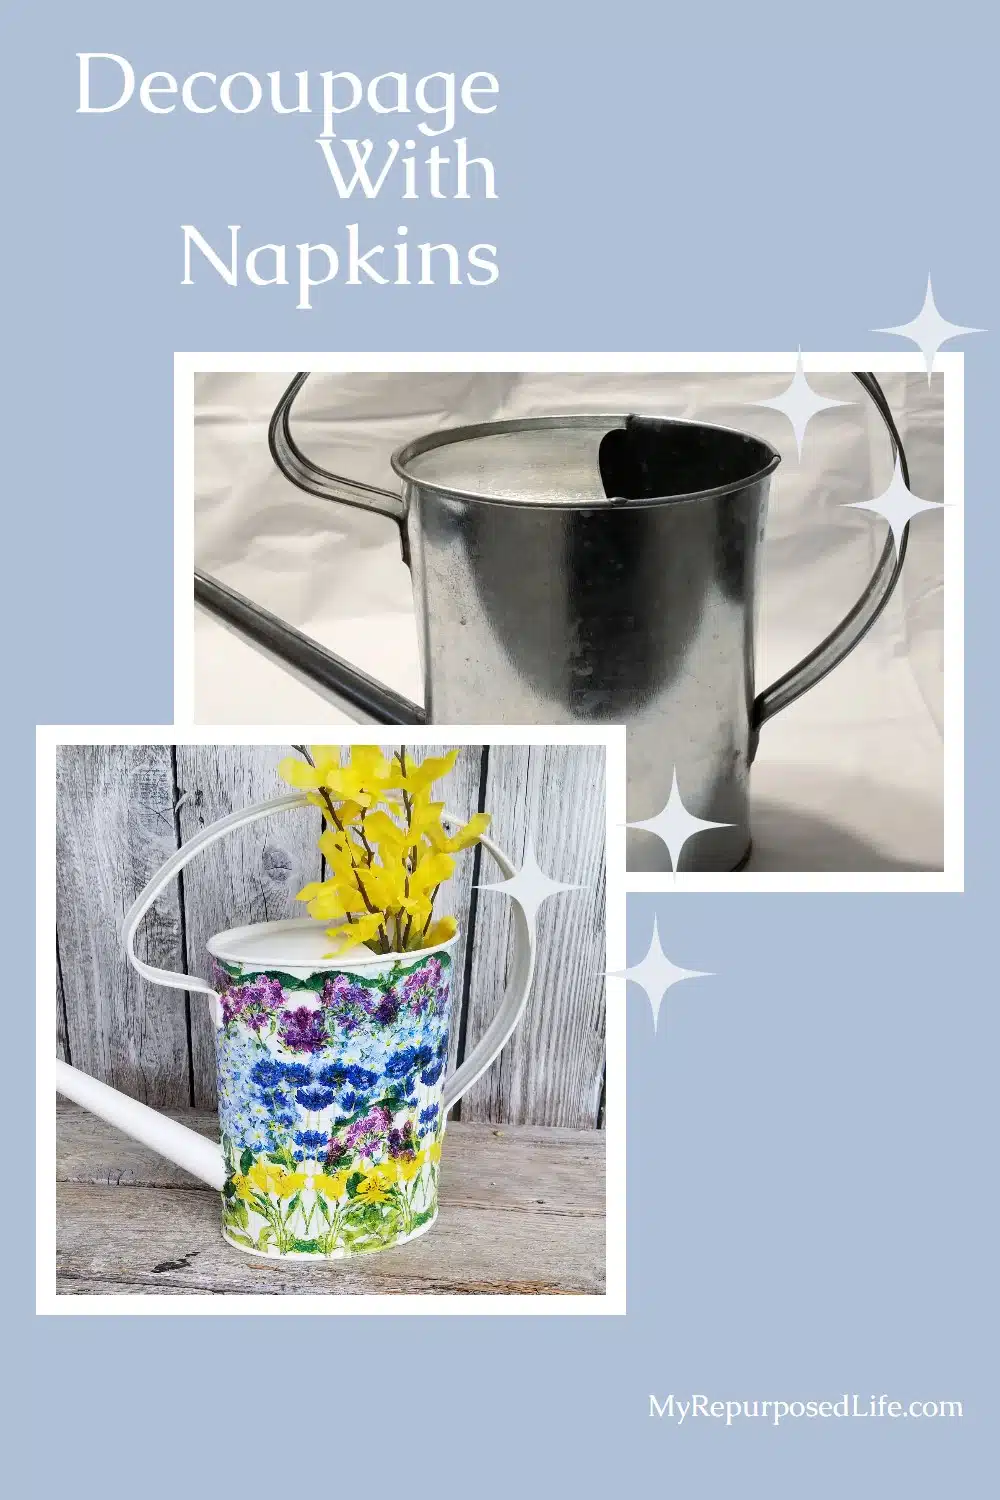 How to decoupage a watering can using pretty floral napkins. This easy craft can be done in just a couple of hours. Do more than one to make a set. Great for displaying cut flowers indoors. #MyRepurposedLife #repurposed #wateringcan #decoupage #craft via @repurposedlife